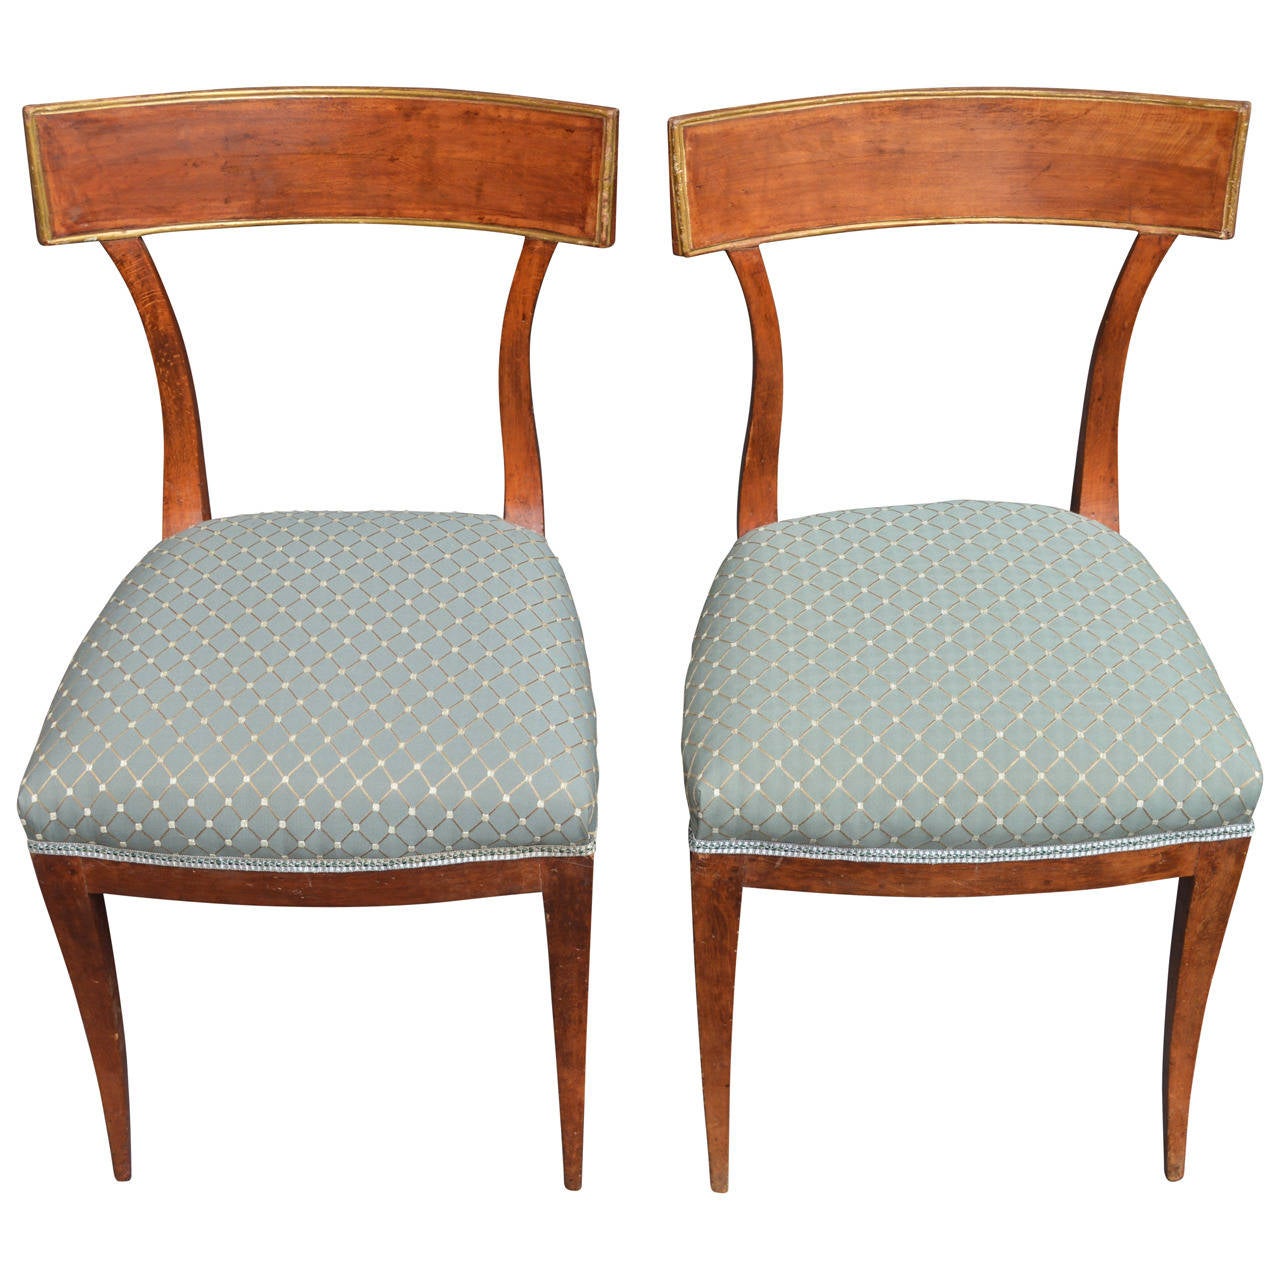 Upholstery Set of Italian Directoire Curved Back Walnut Chairs